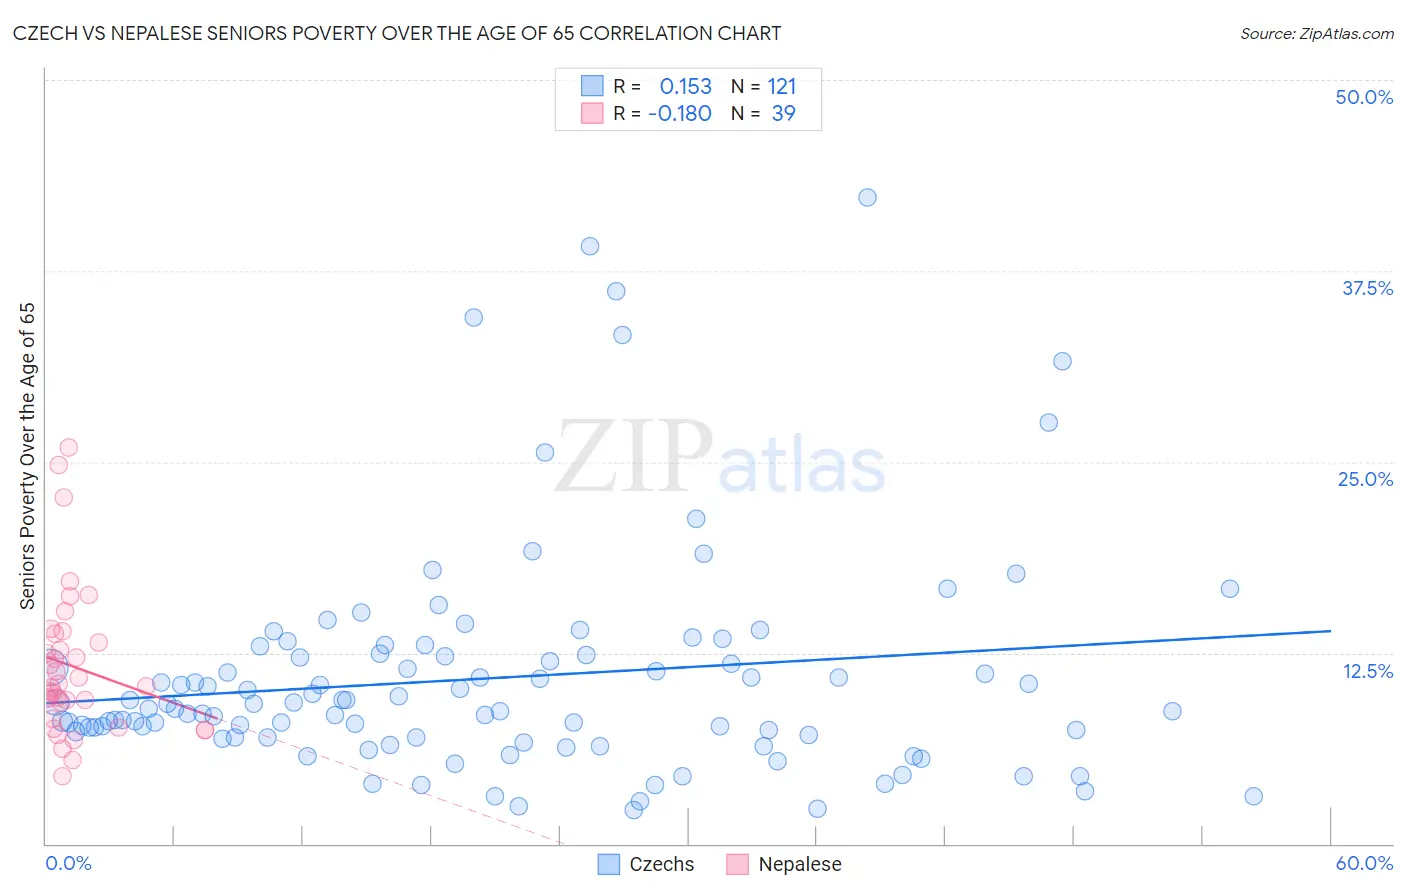 Czech vs Nepalese Seniors Poverty Over the Age of 65